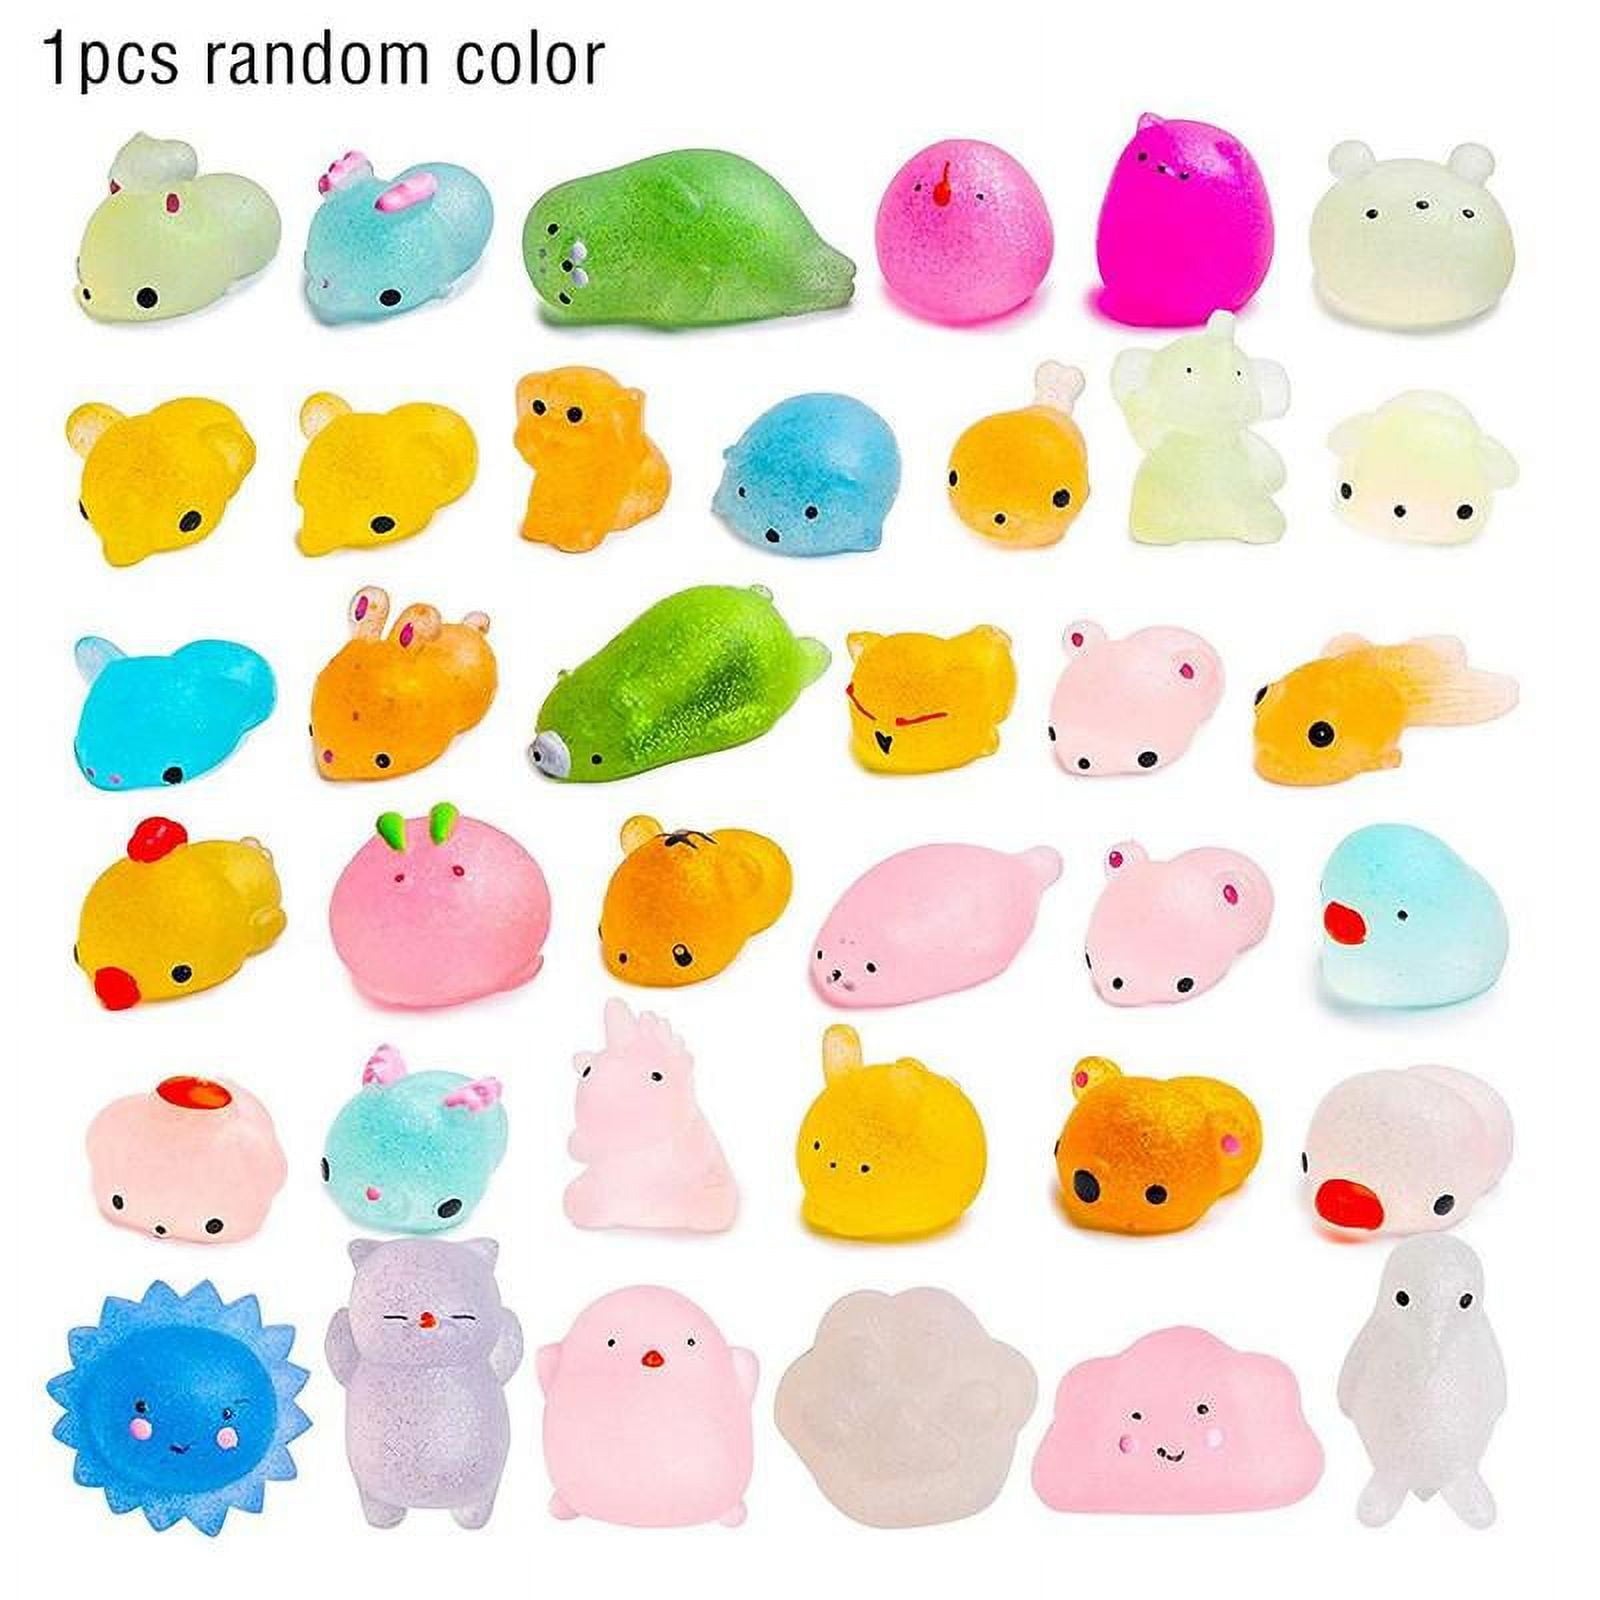 New Mochi Squishy Toys Animal Squishies Party Favors Stress Relief NEW ...